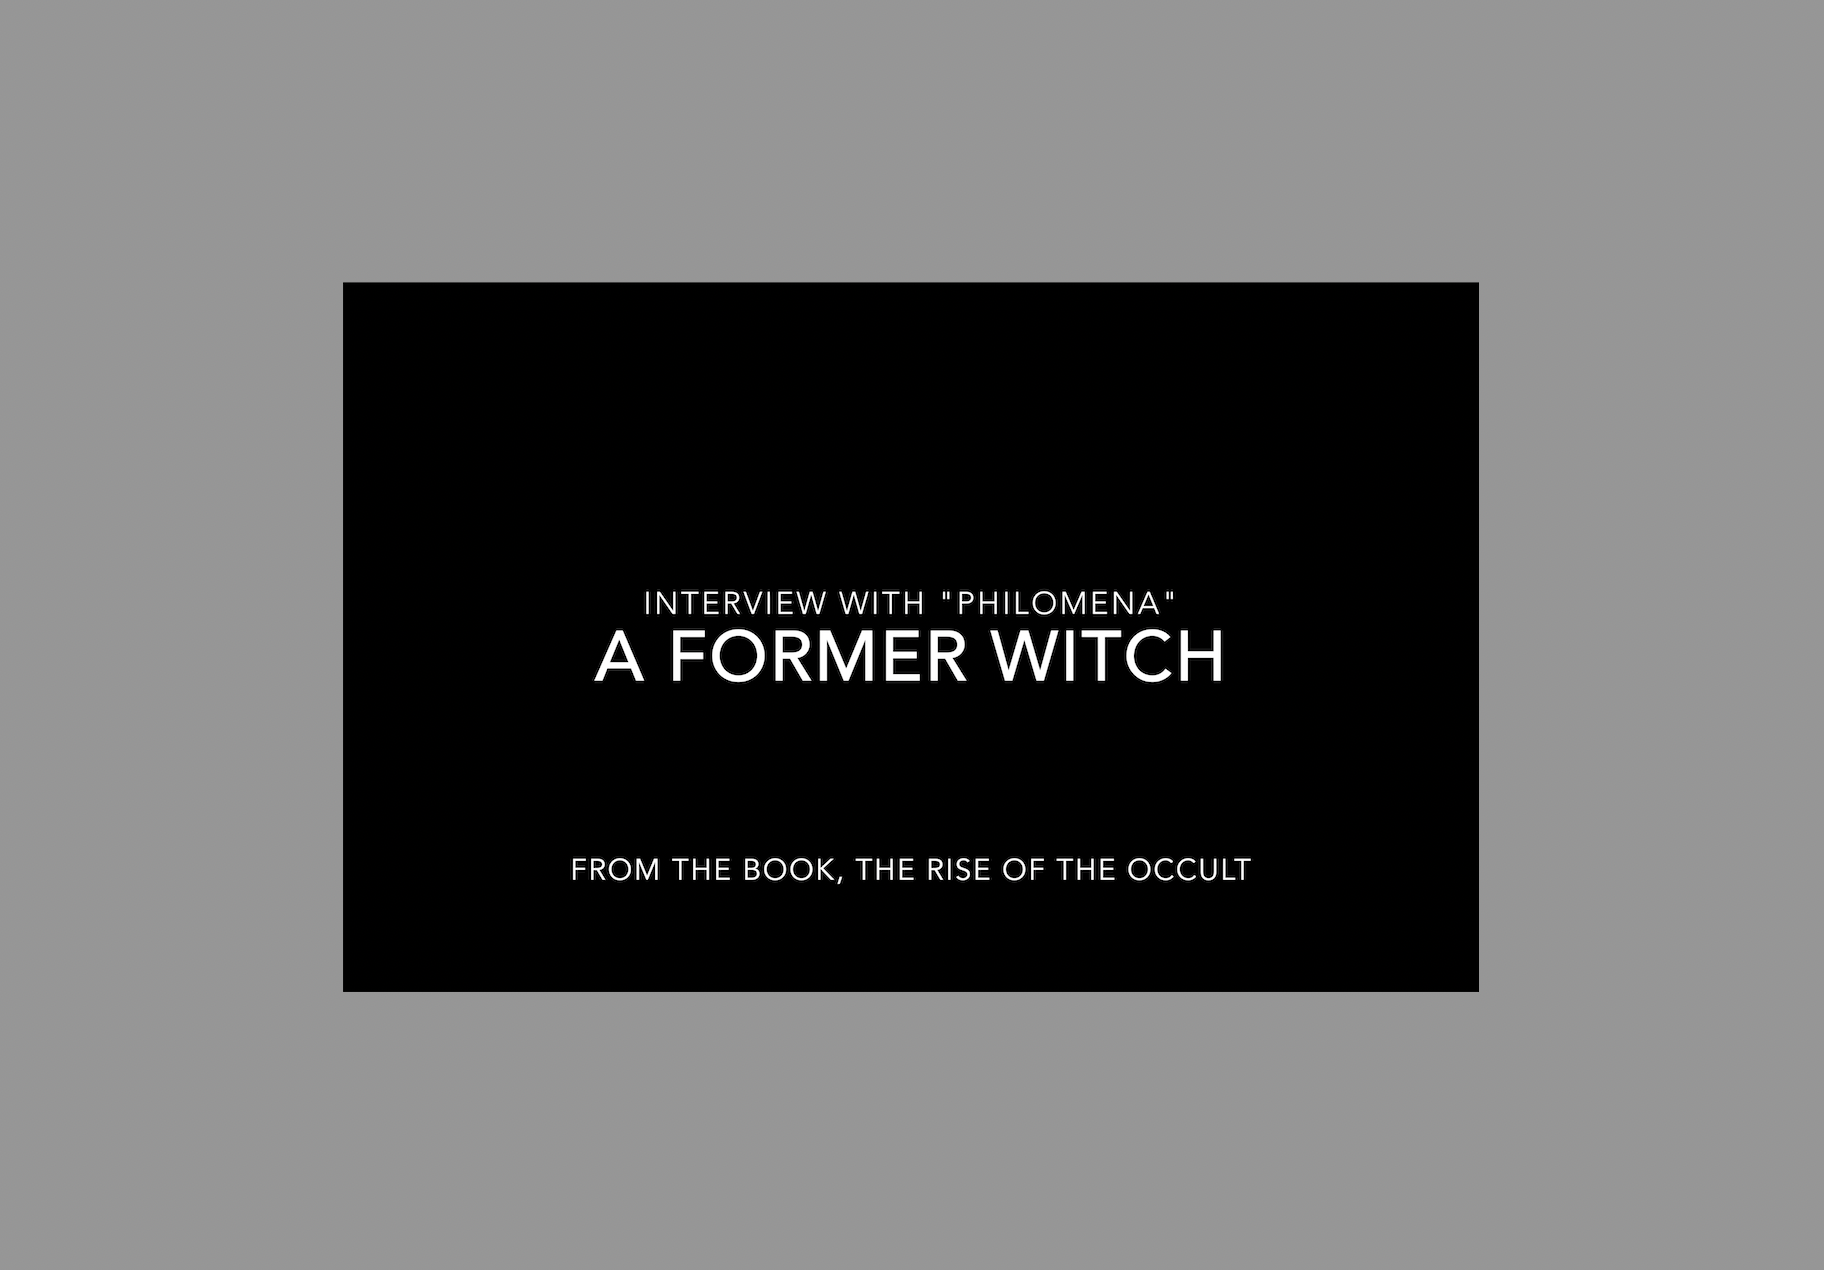 First Posted Interview with a Former Witch - Philomena, from "The Rise of the Occult"